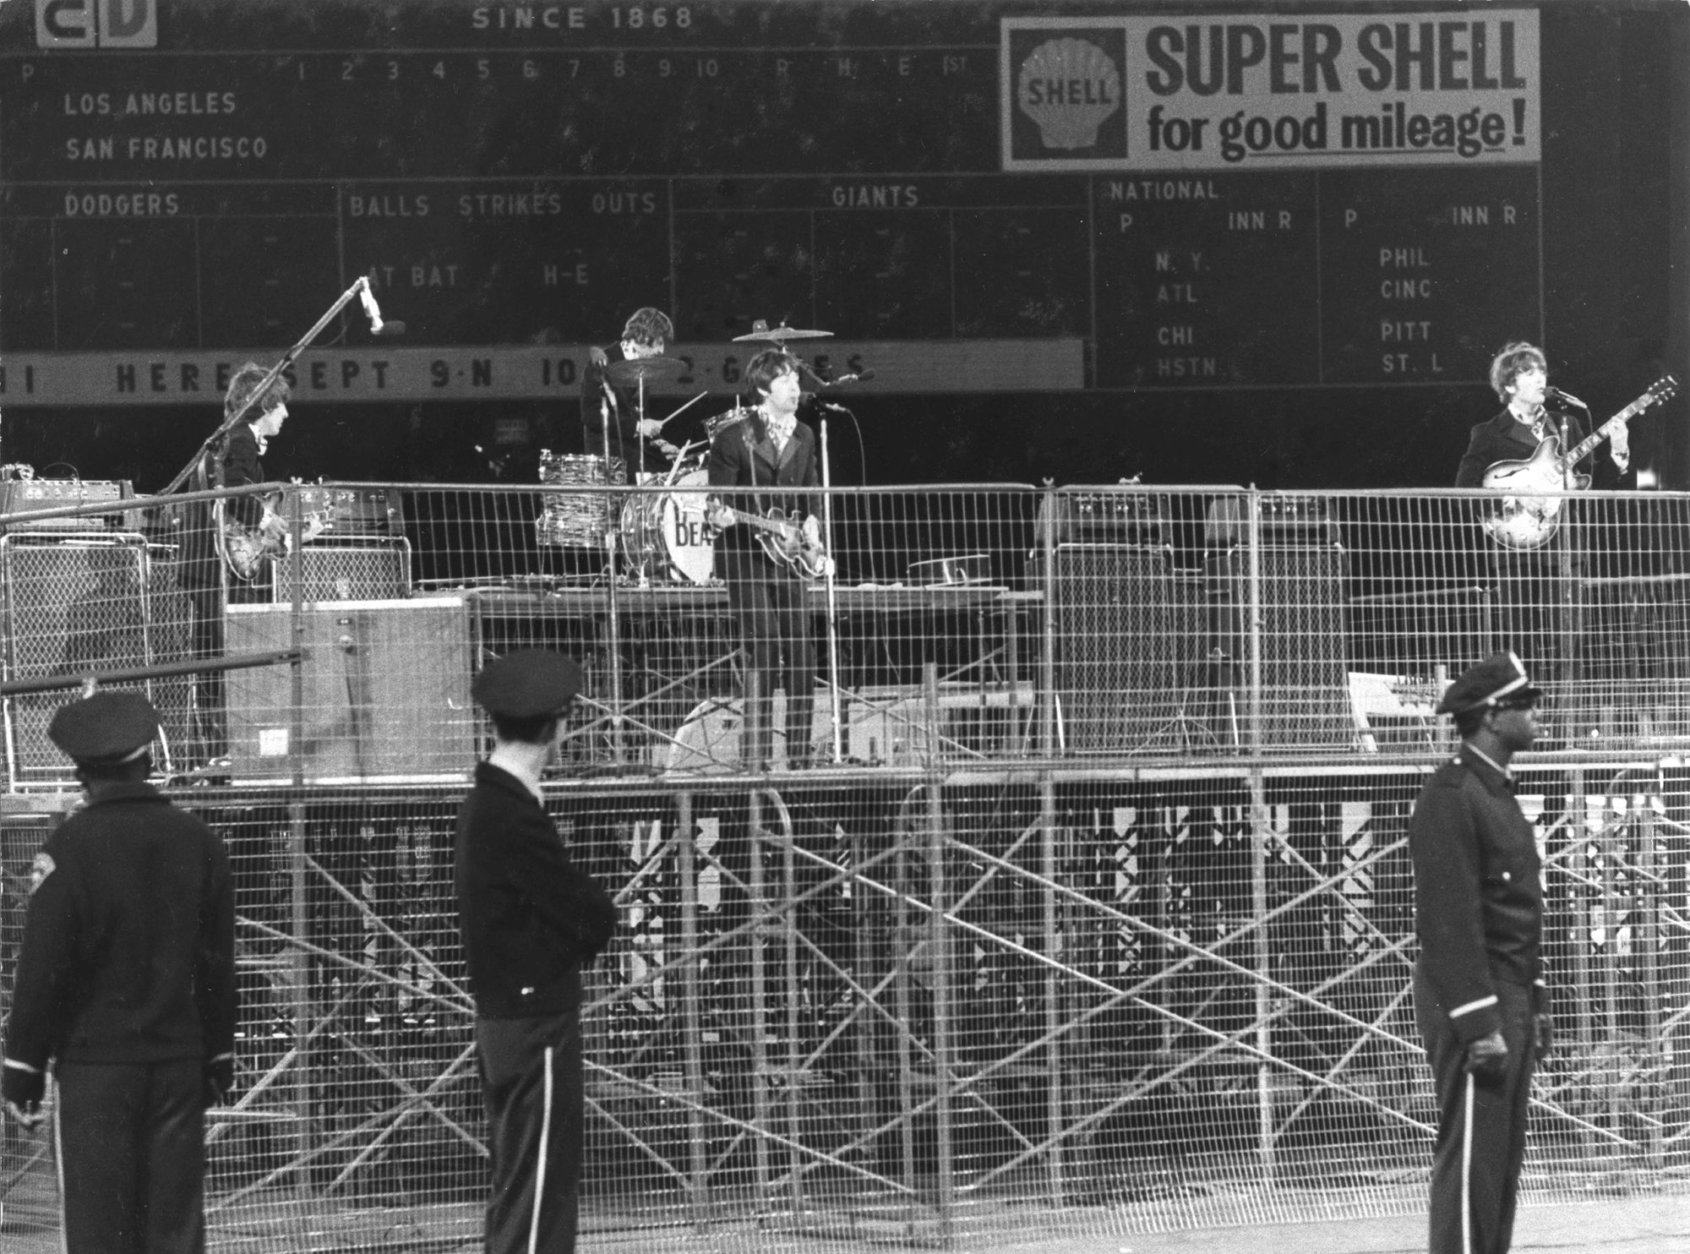 In this photo taken Aug. 29, 1966, the Beatles perform at Candlestick Park in San Francisco. Candlestick Park, known for its bone-numbing winds, the Catch and the earthquake-rocked 1989 World Series is officially closing after more than a half century of hosting sporting and cultural events. In a bow to historical symmetry, the Stick's finale will be a performance Thursday by Paul McCartney, 48 years after the Beatles' last scheduled concert lit up the venue. (AP Photo/Fred Pardini)